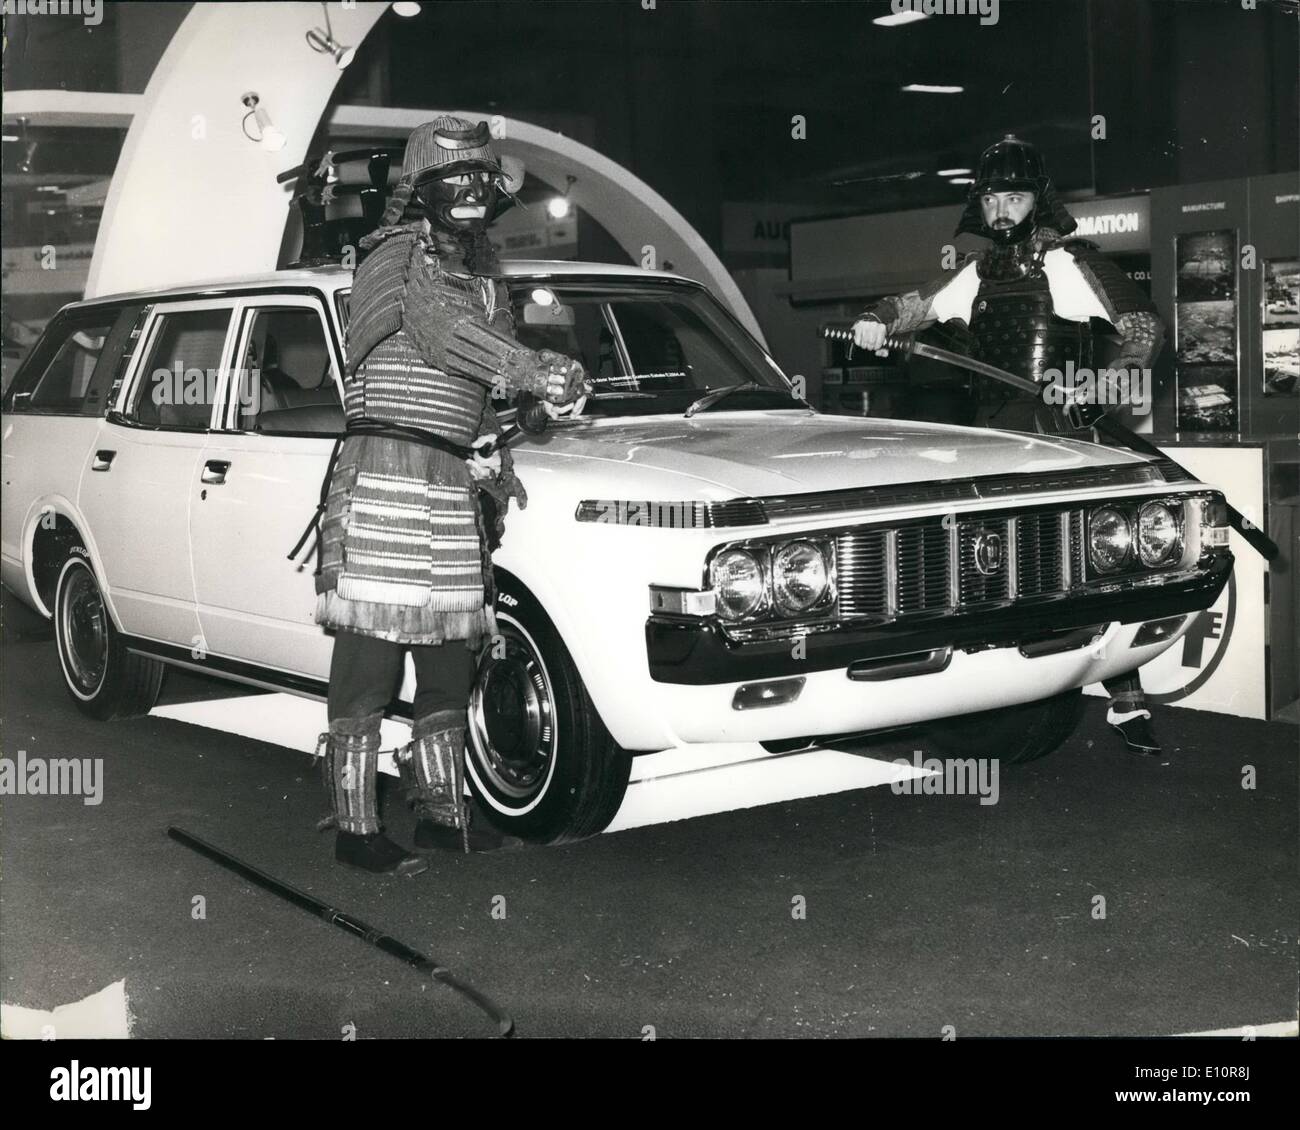 Oct. 10, 1973 - Motor show 73' at Earls Court. Photo shows two warriors, Resplendent in 300 year old Japanese fighting Armour stand guard over the new Crown 2600 custom Toyota Estate at the press preview Earls Court today. Stock Photo